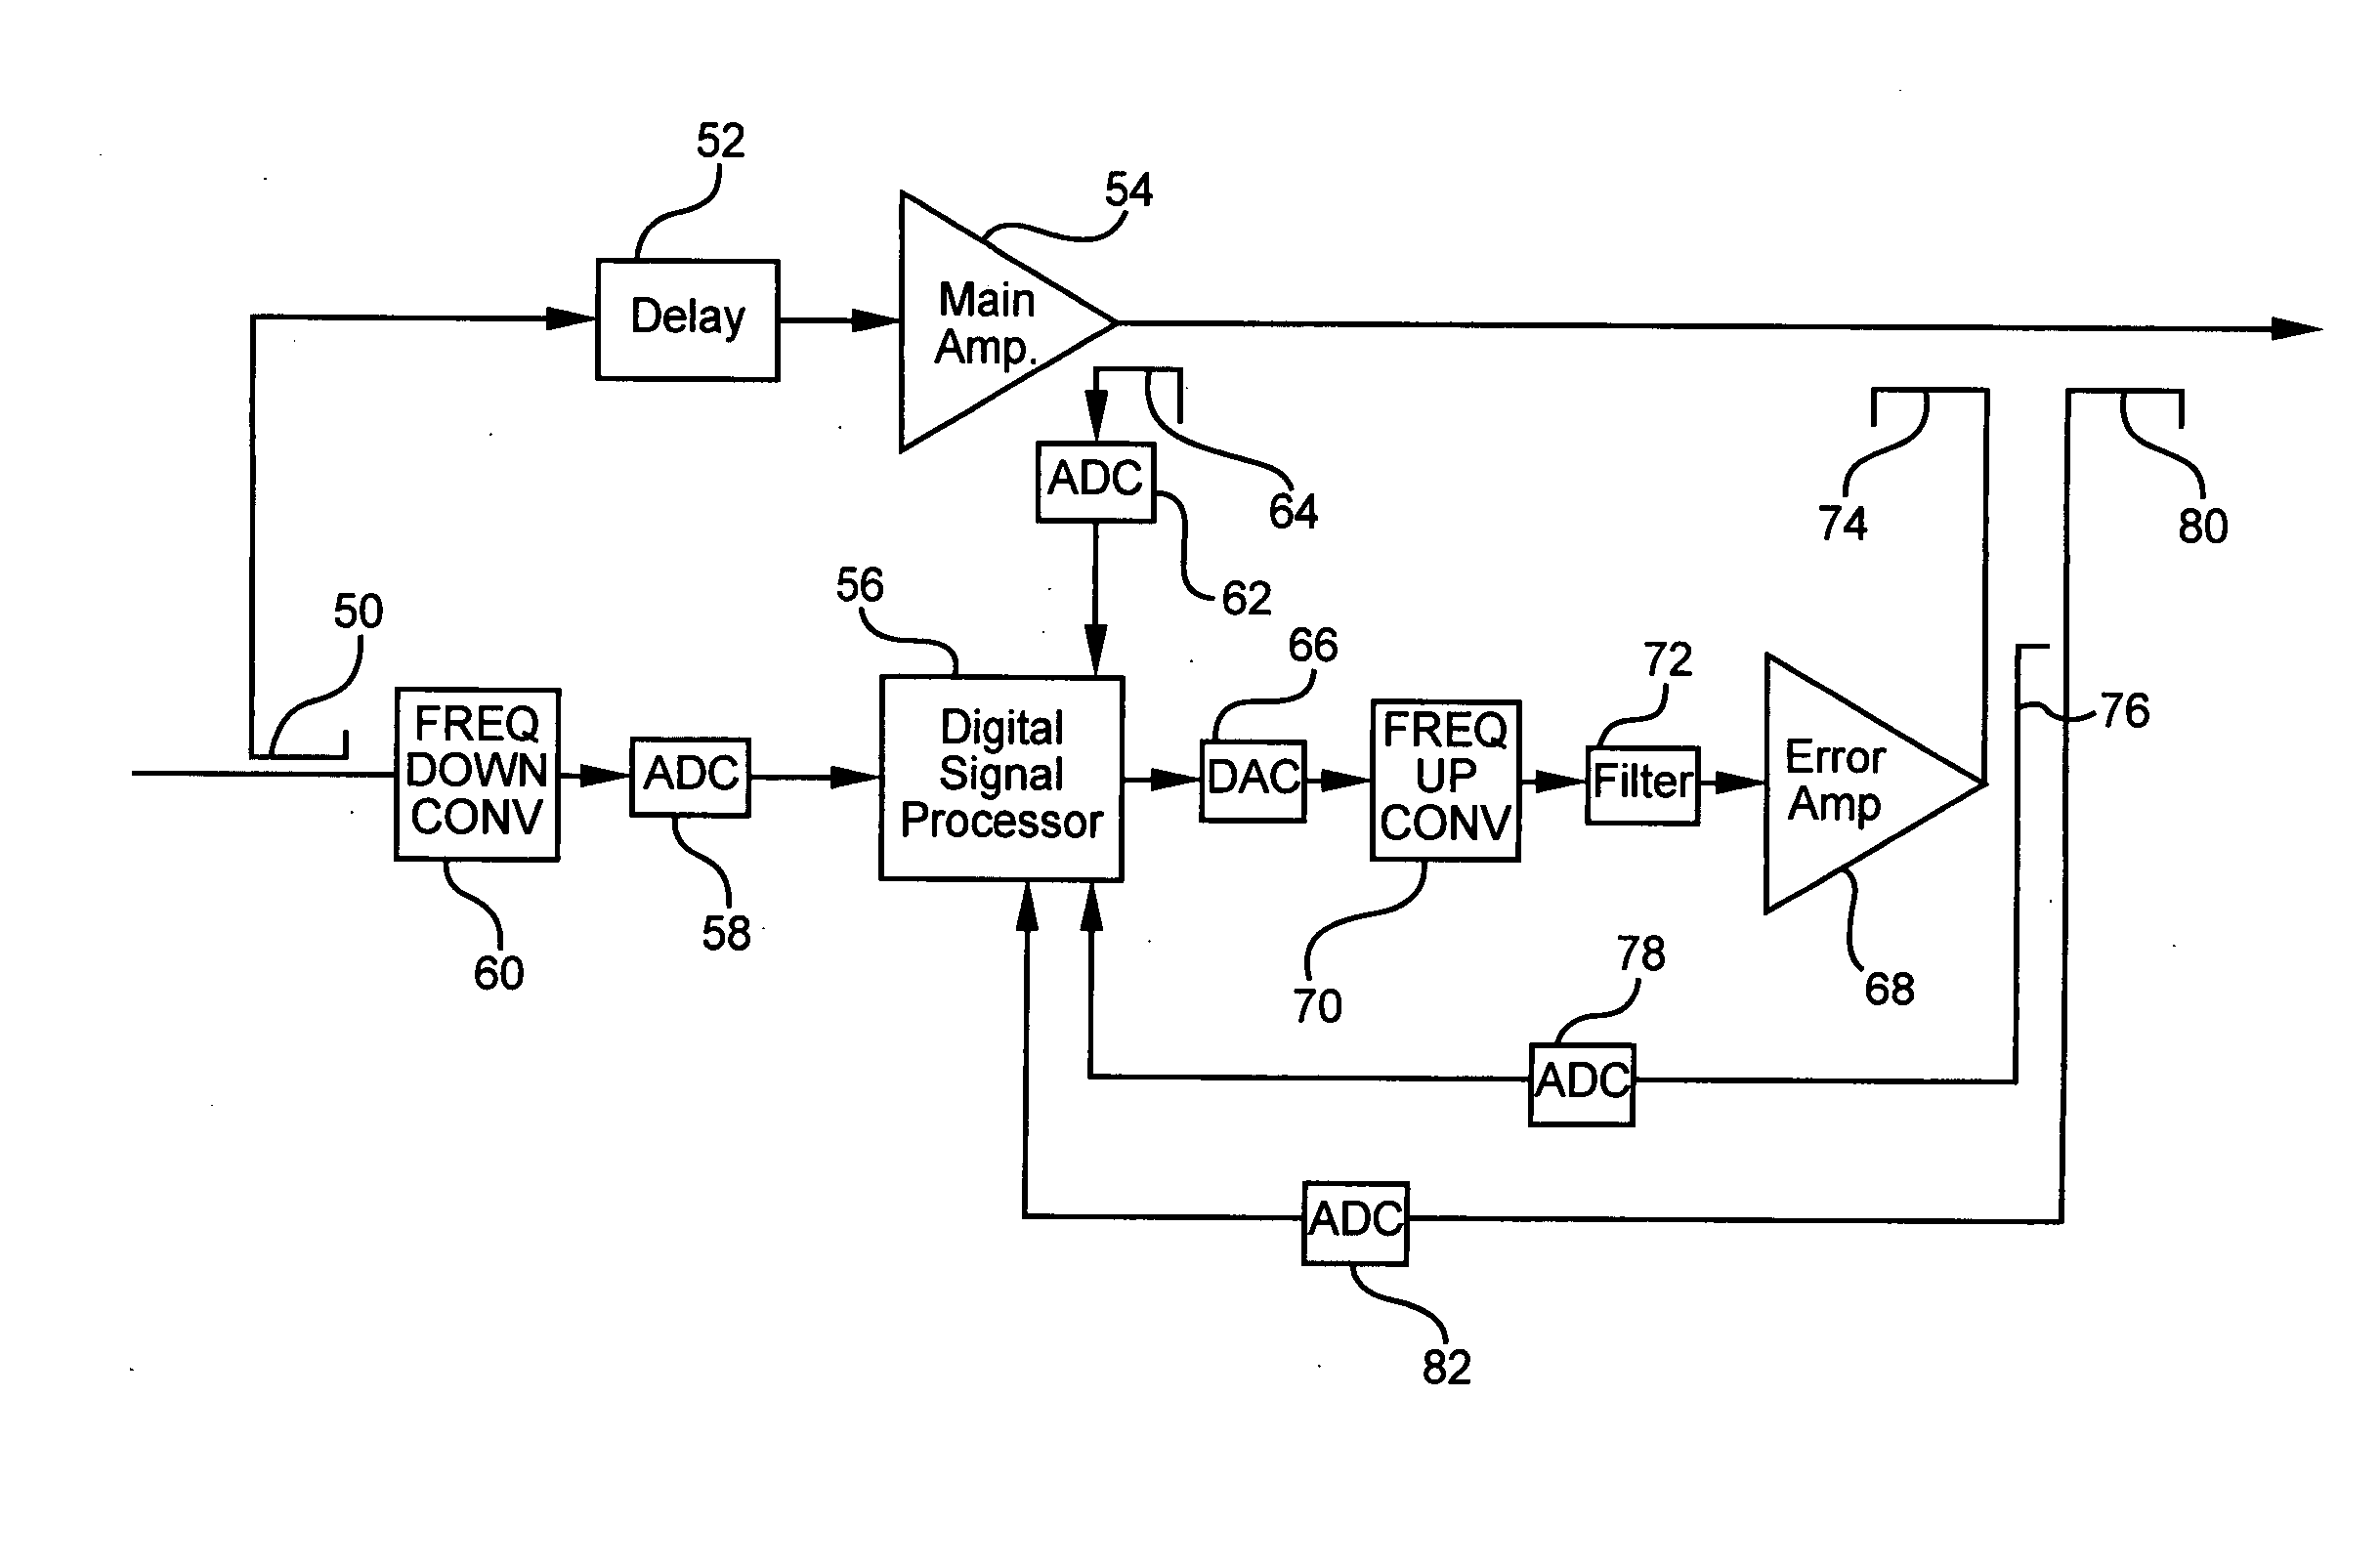 Digital signal processing based implementation of a feed forward amplifier